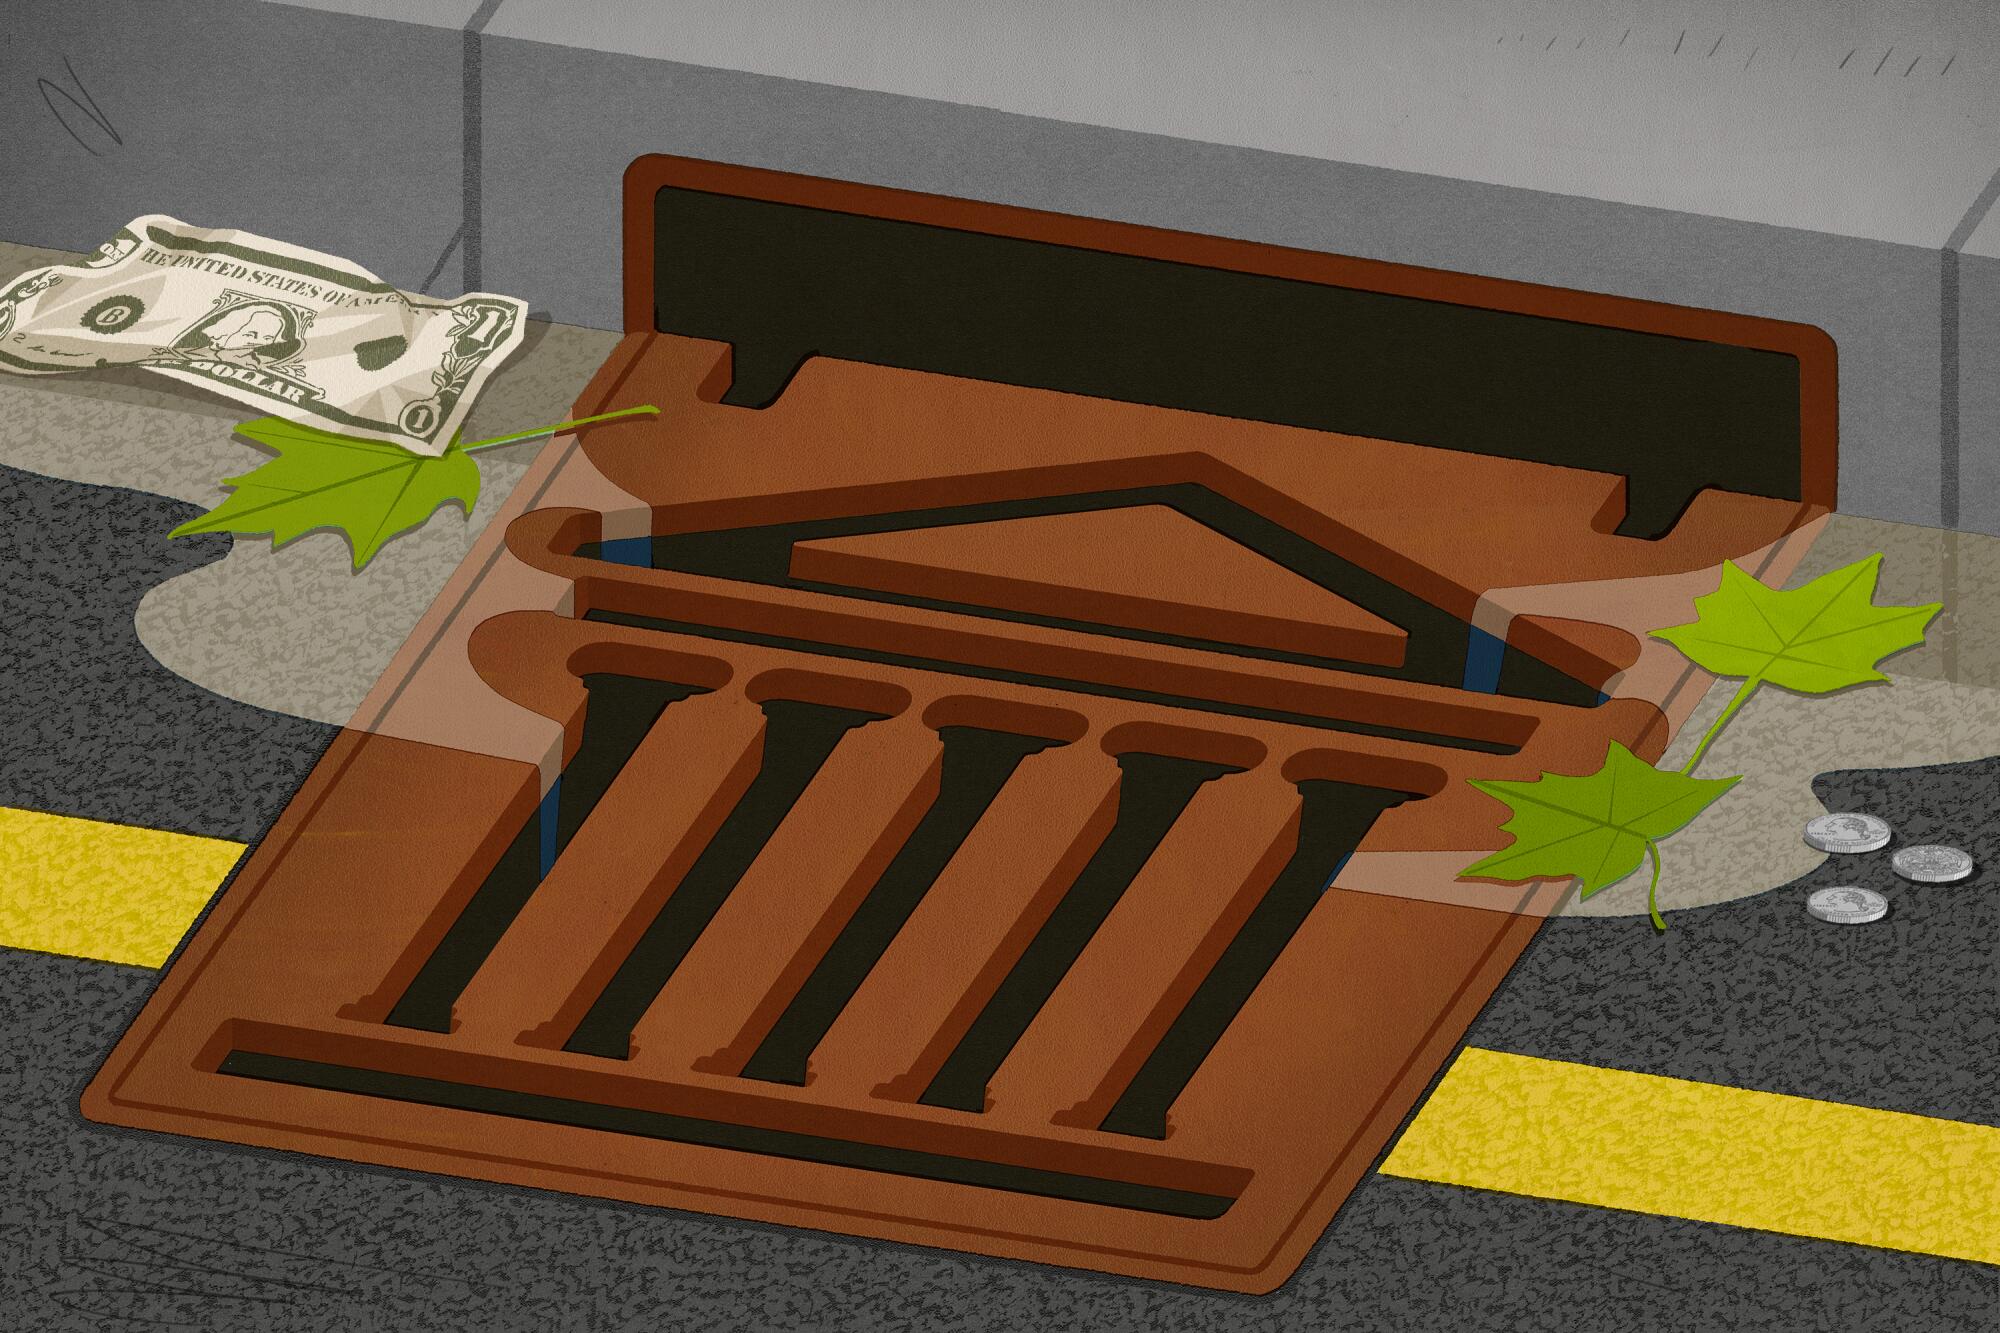 Illustration of a storm drain with a bank icon in the grate. Muddy water and some money is dripping into the drain.